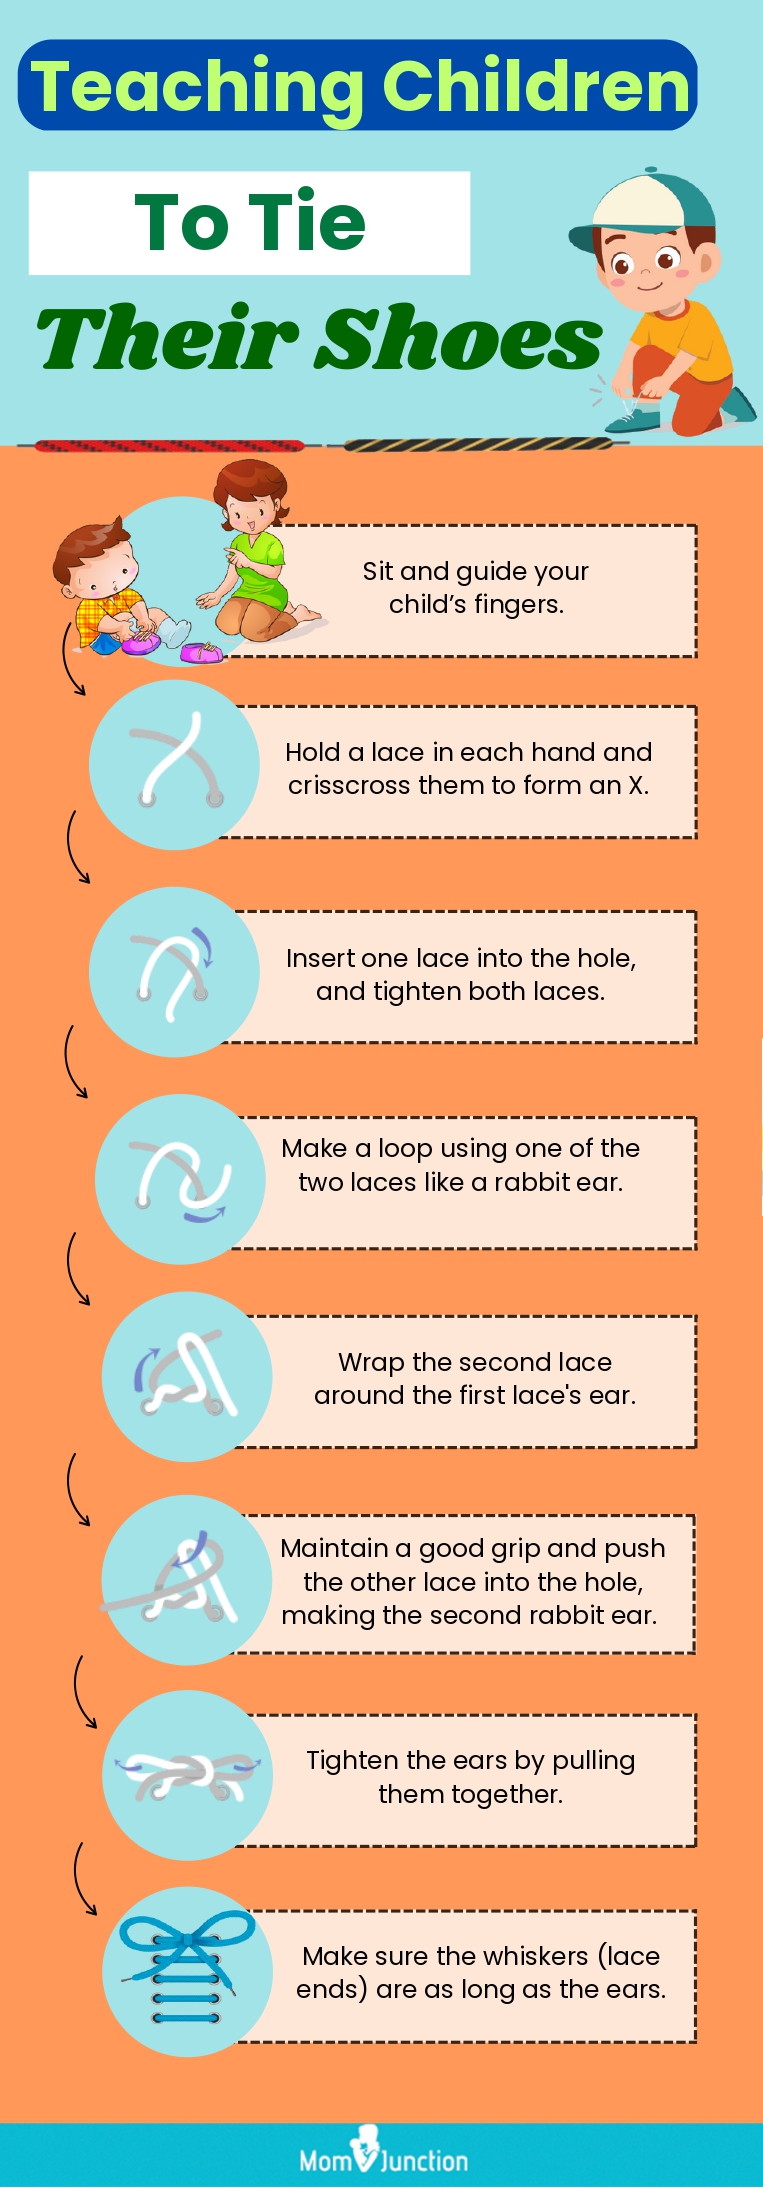 easy steps for teaching children how to tie their shoes(infographic)